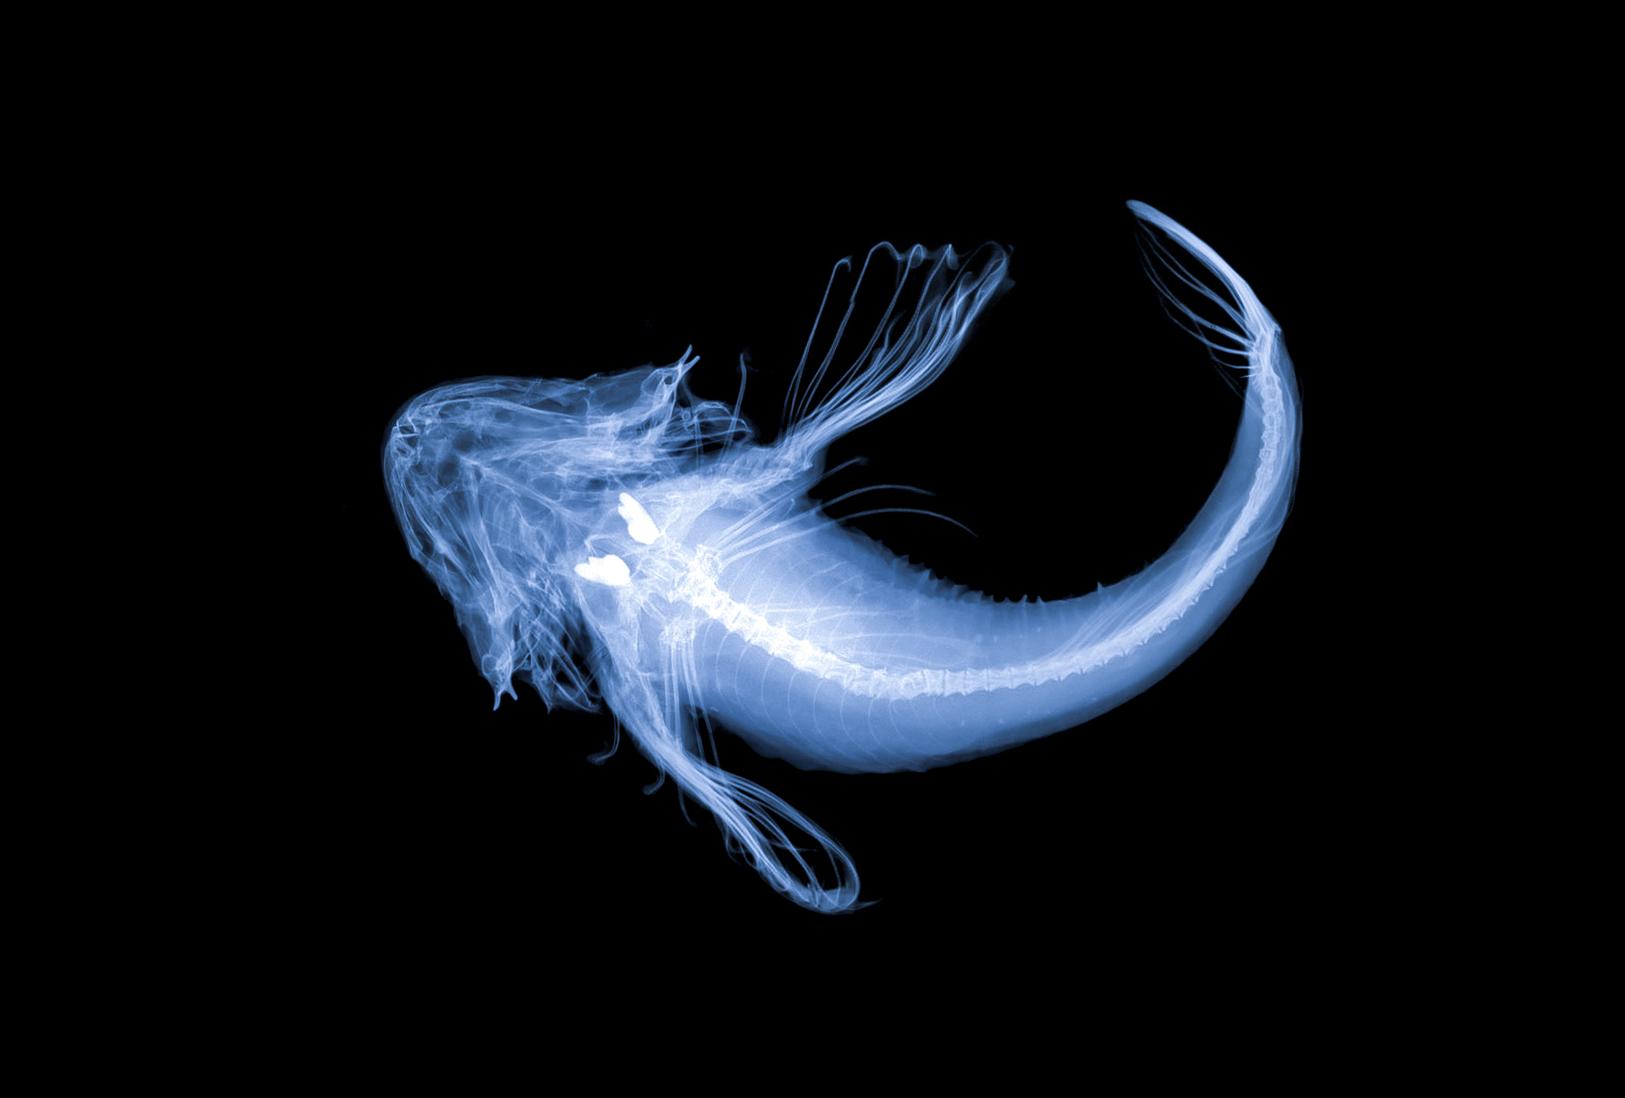 X-ray image of deepwater sculpin